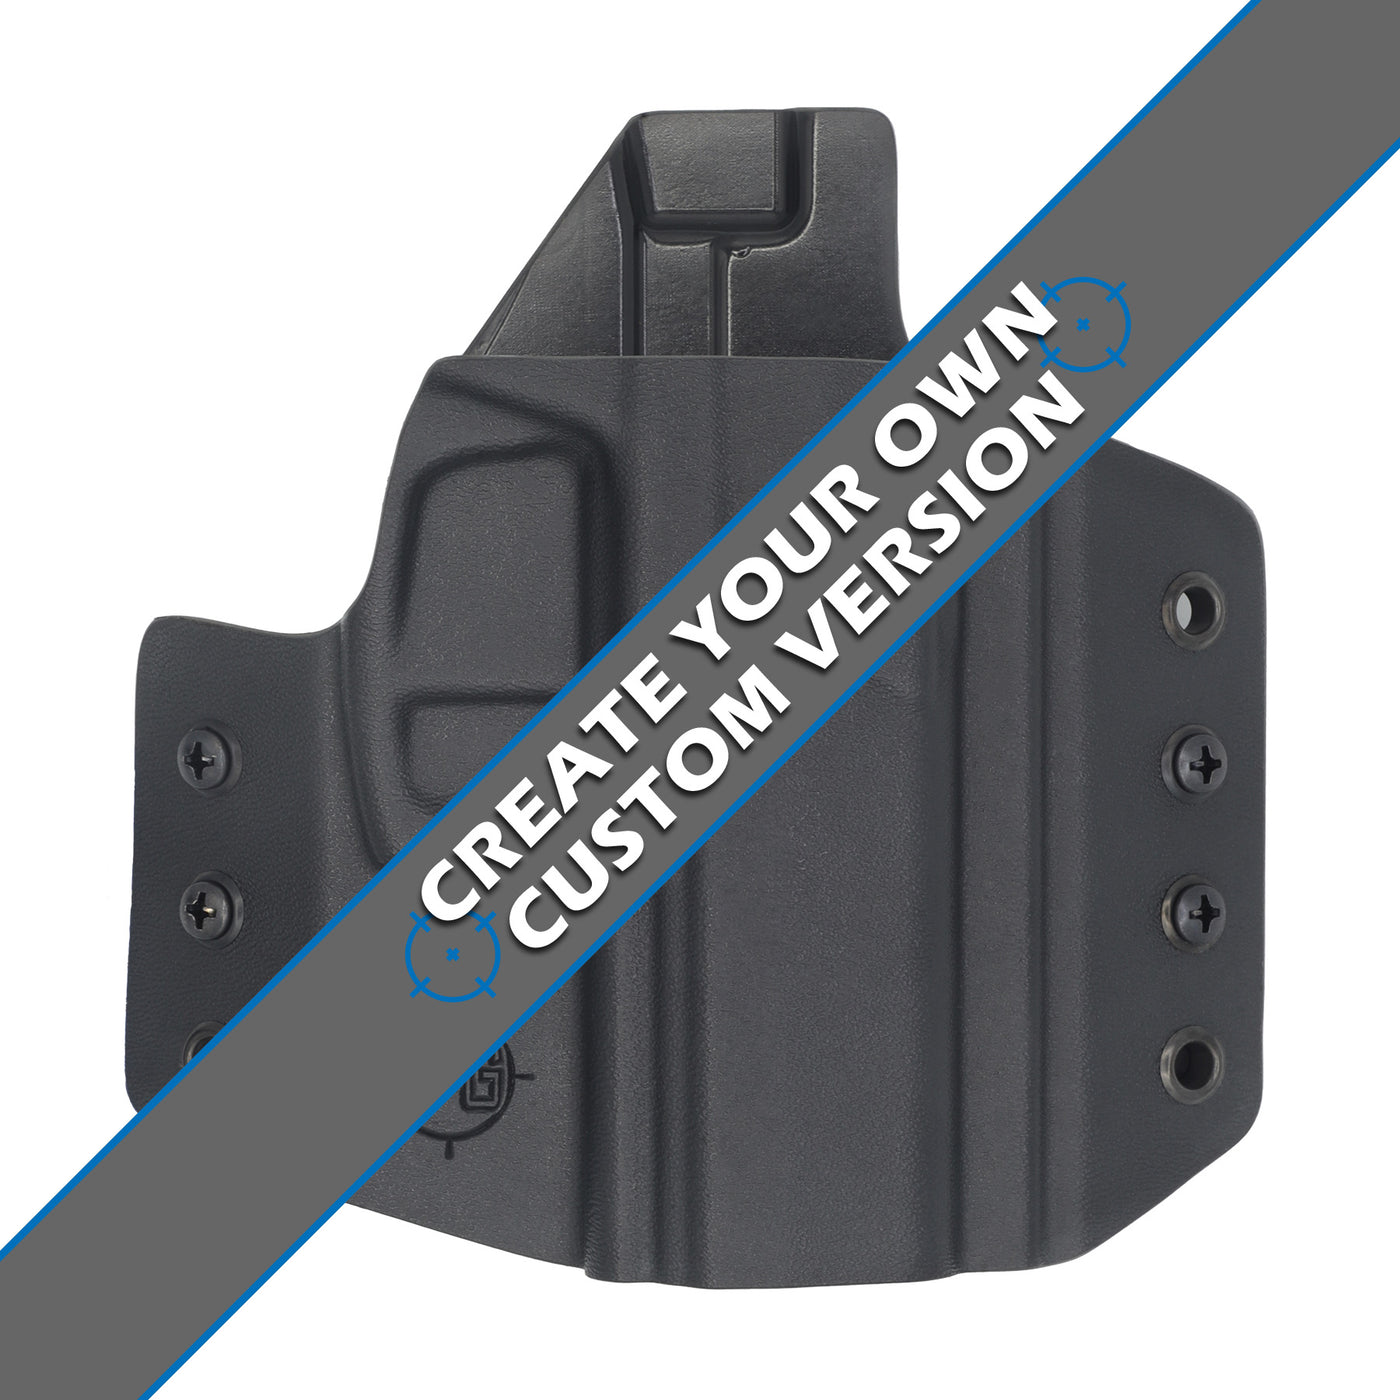 Shown is the custom C&G Holsters OWB Outside the waistband Holster for the H&K P30sk.